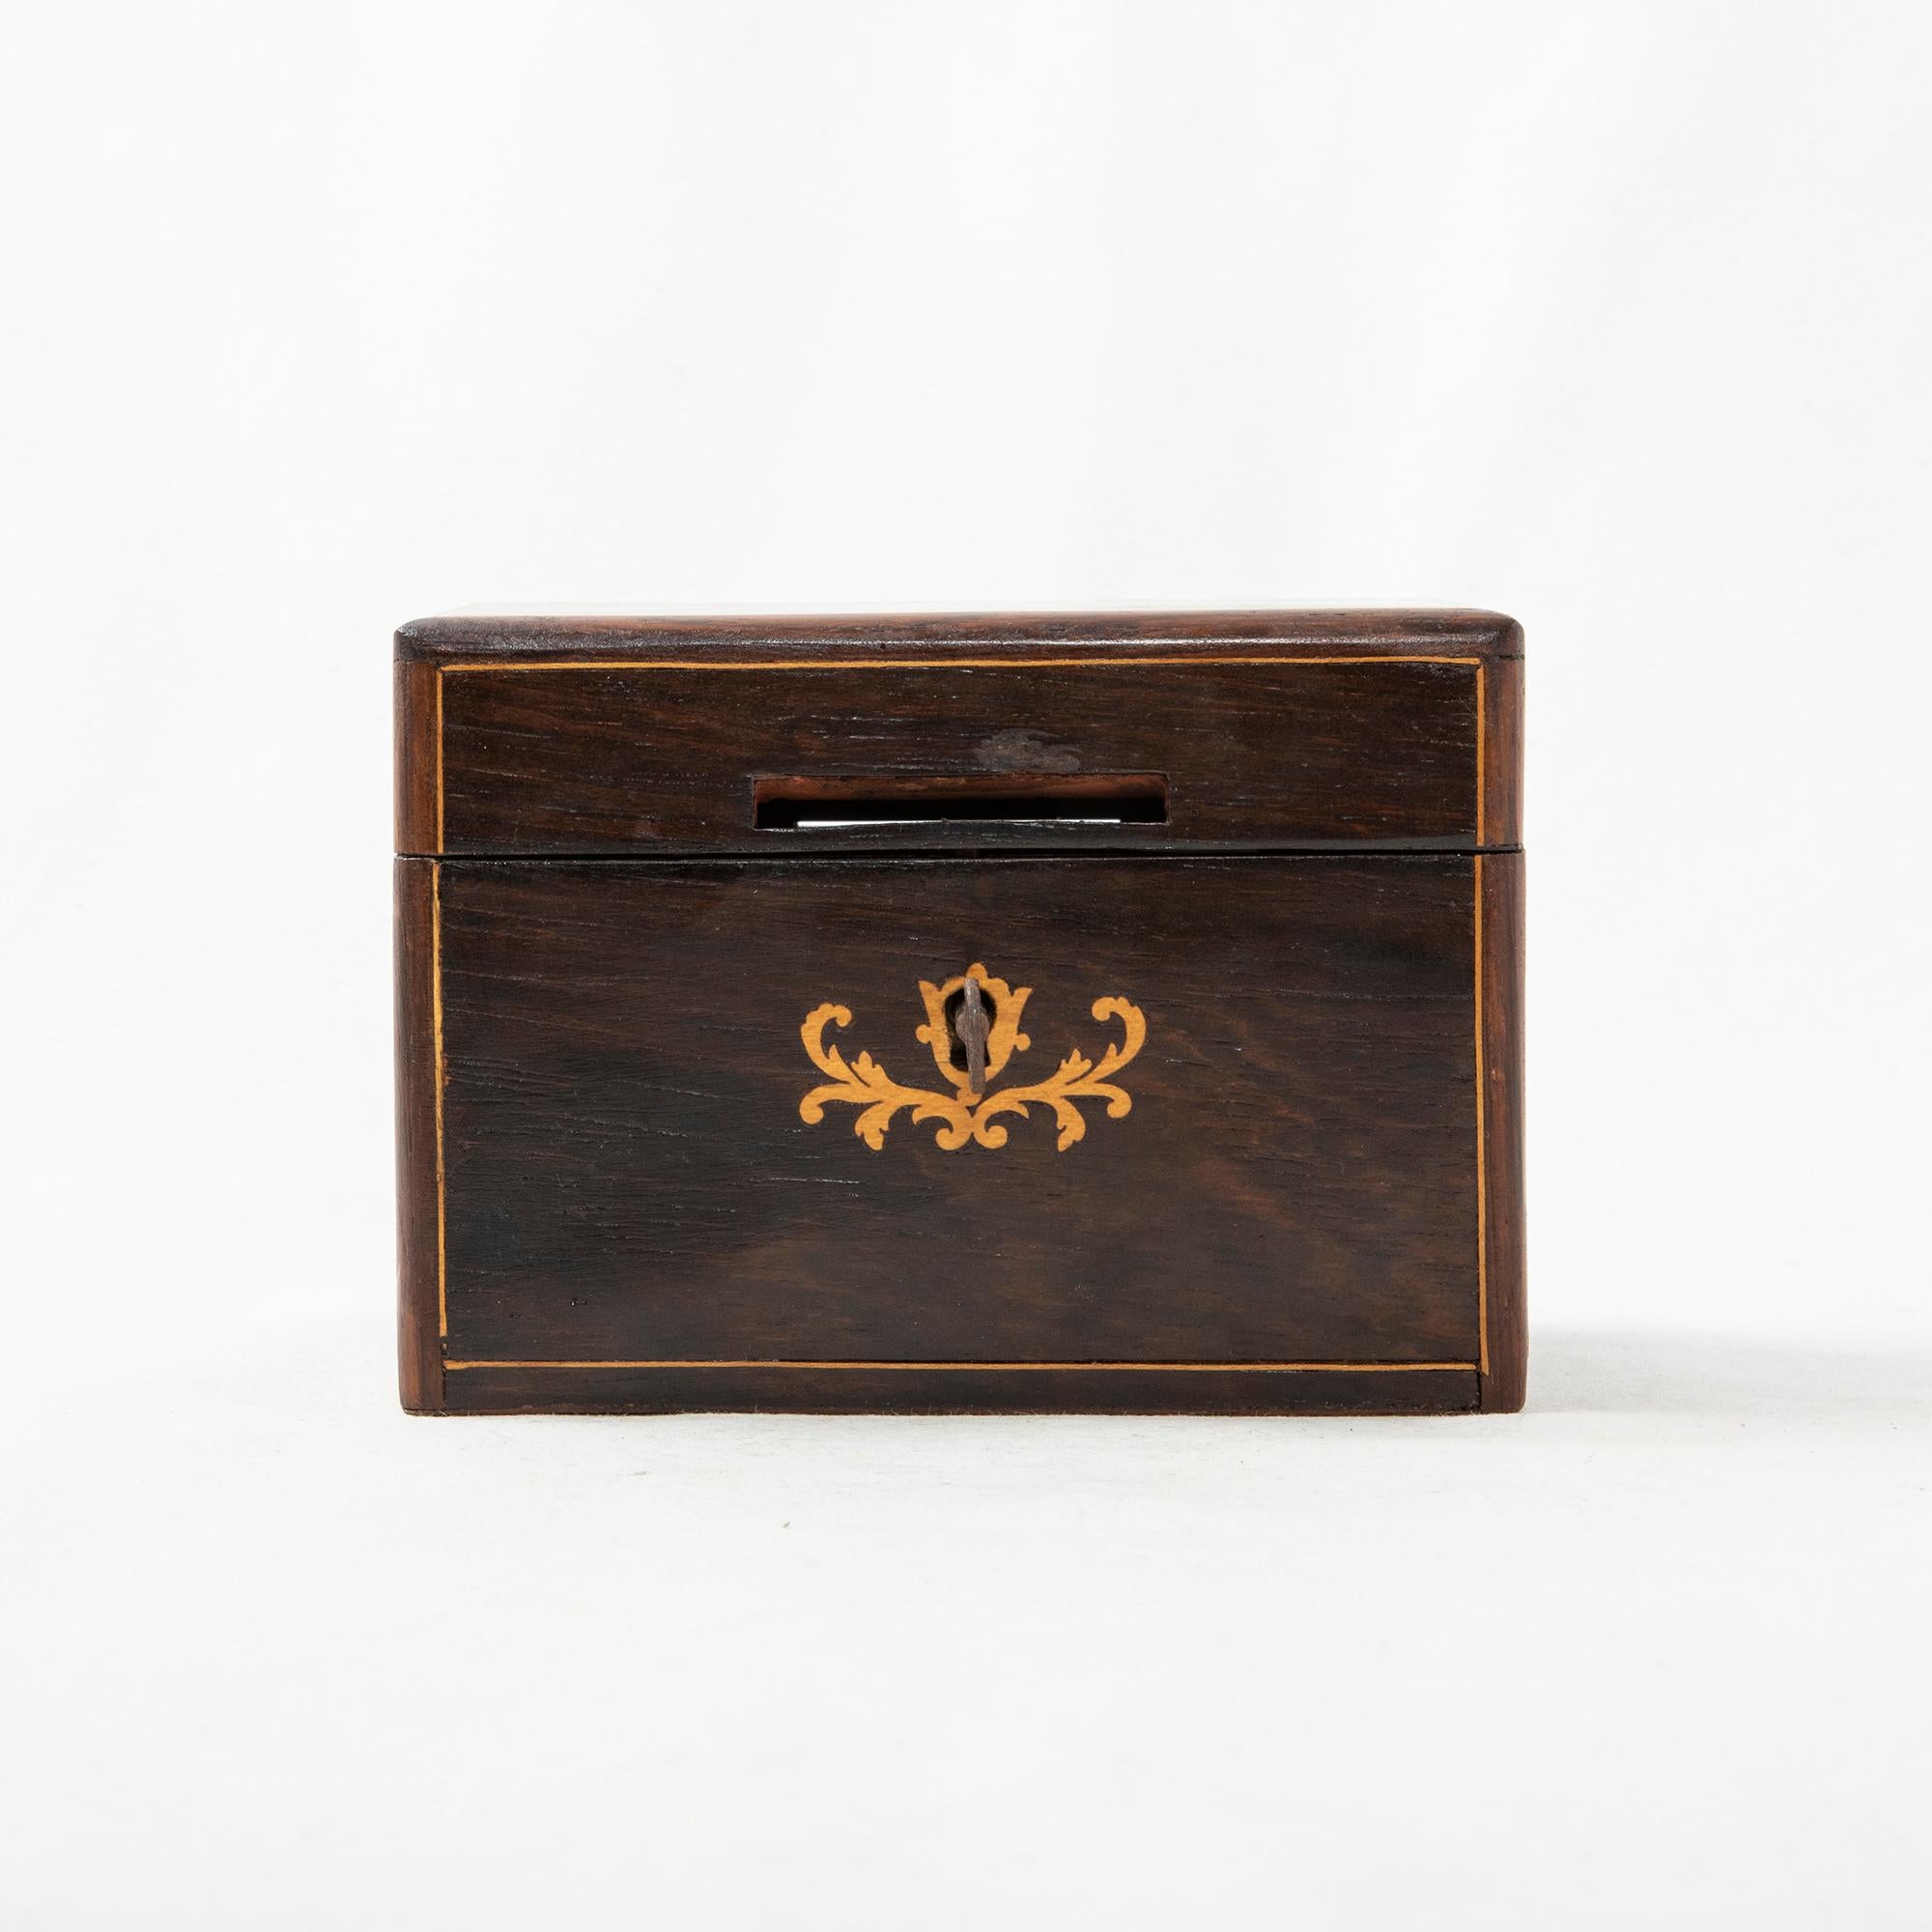 This mid-nineteenth century French Charles X period coin box is constructed of mahogany and features inlaid lemon wood borders. The lemon wood inlay on the lid reads Epargnes, or Savings in English. Intricately scrolling inlay, also in lemon wood,